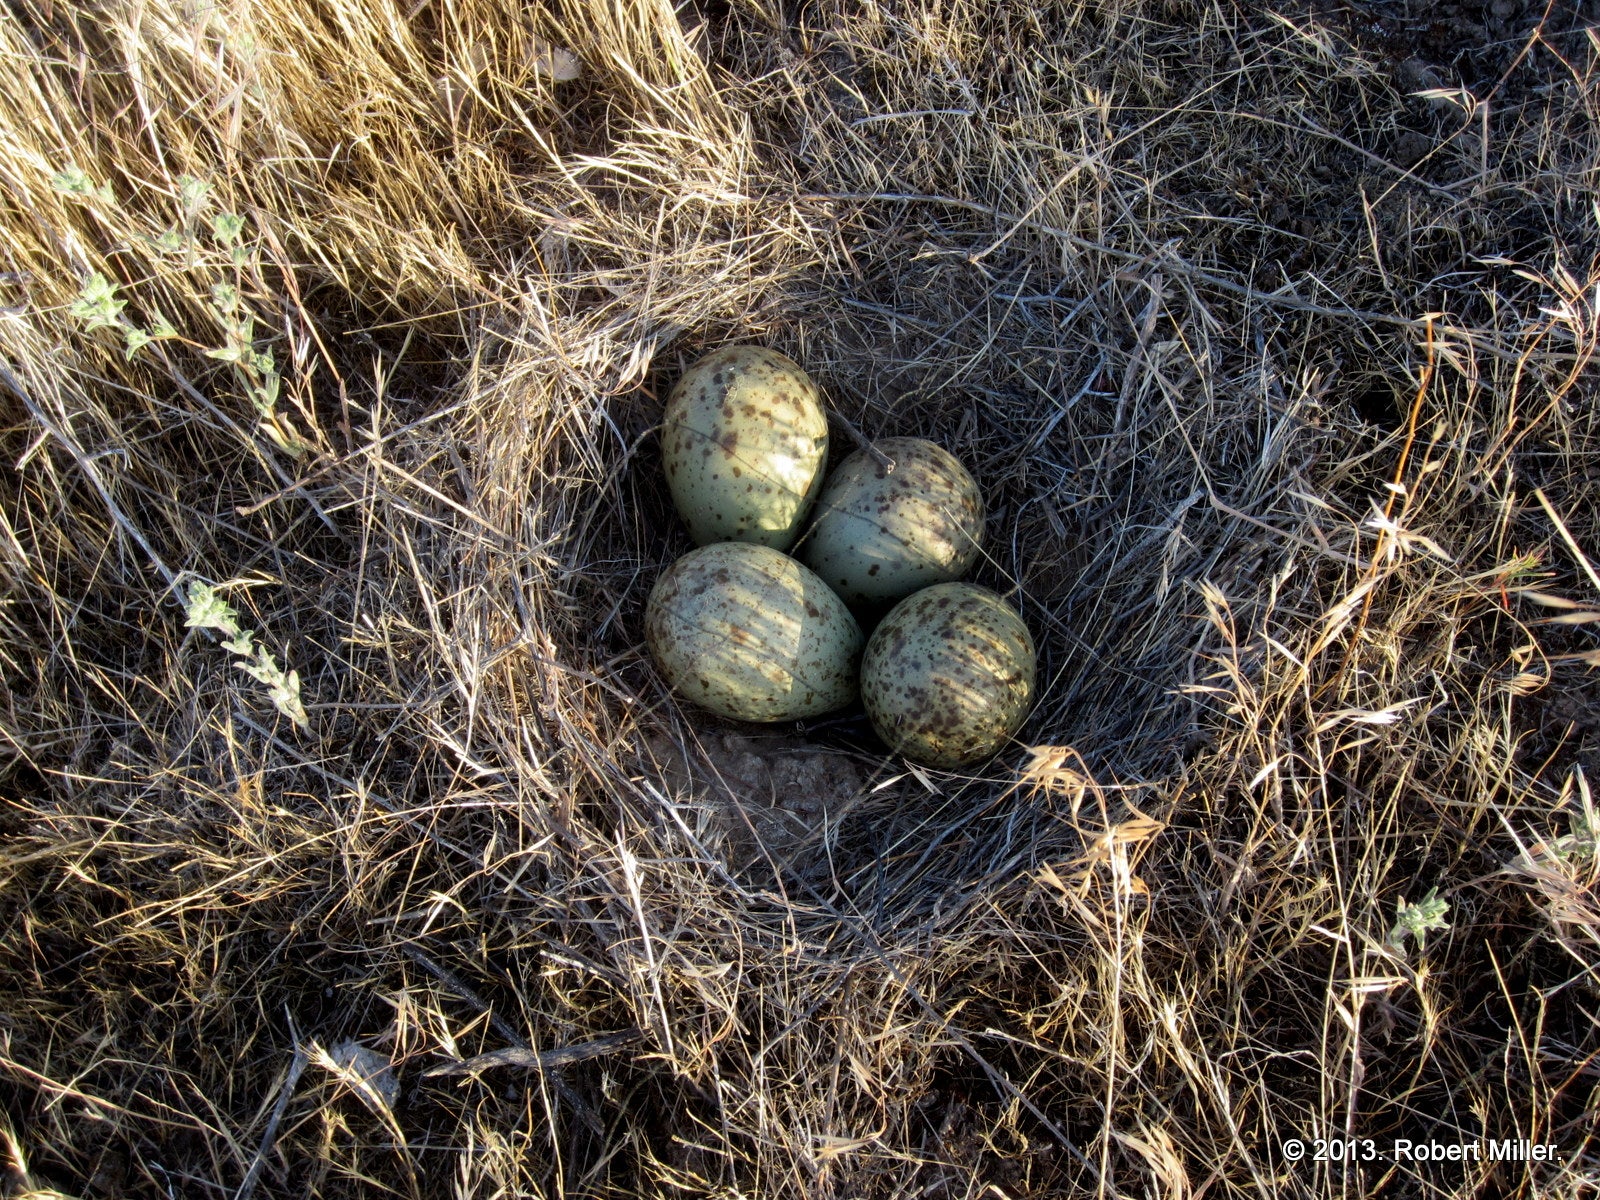 Curlew nesting season is in full swing! Photo by Rob Miller